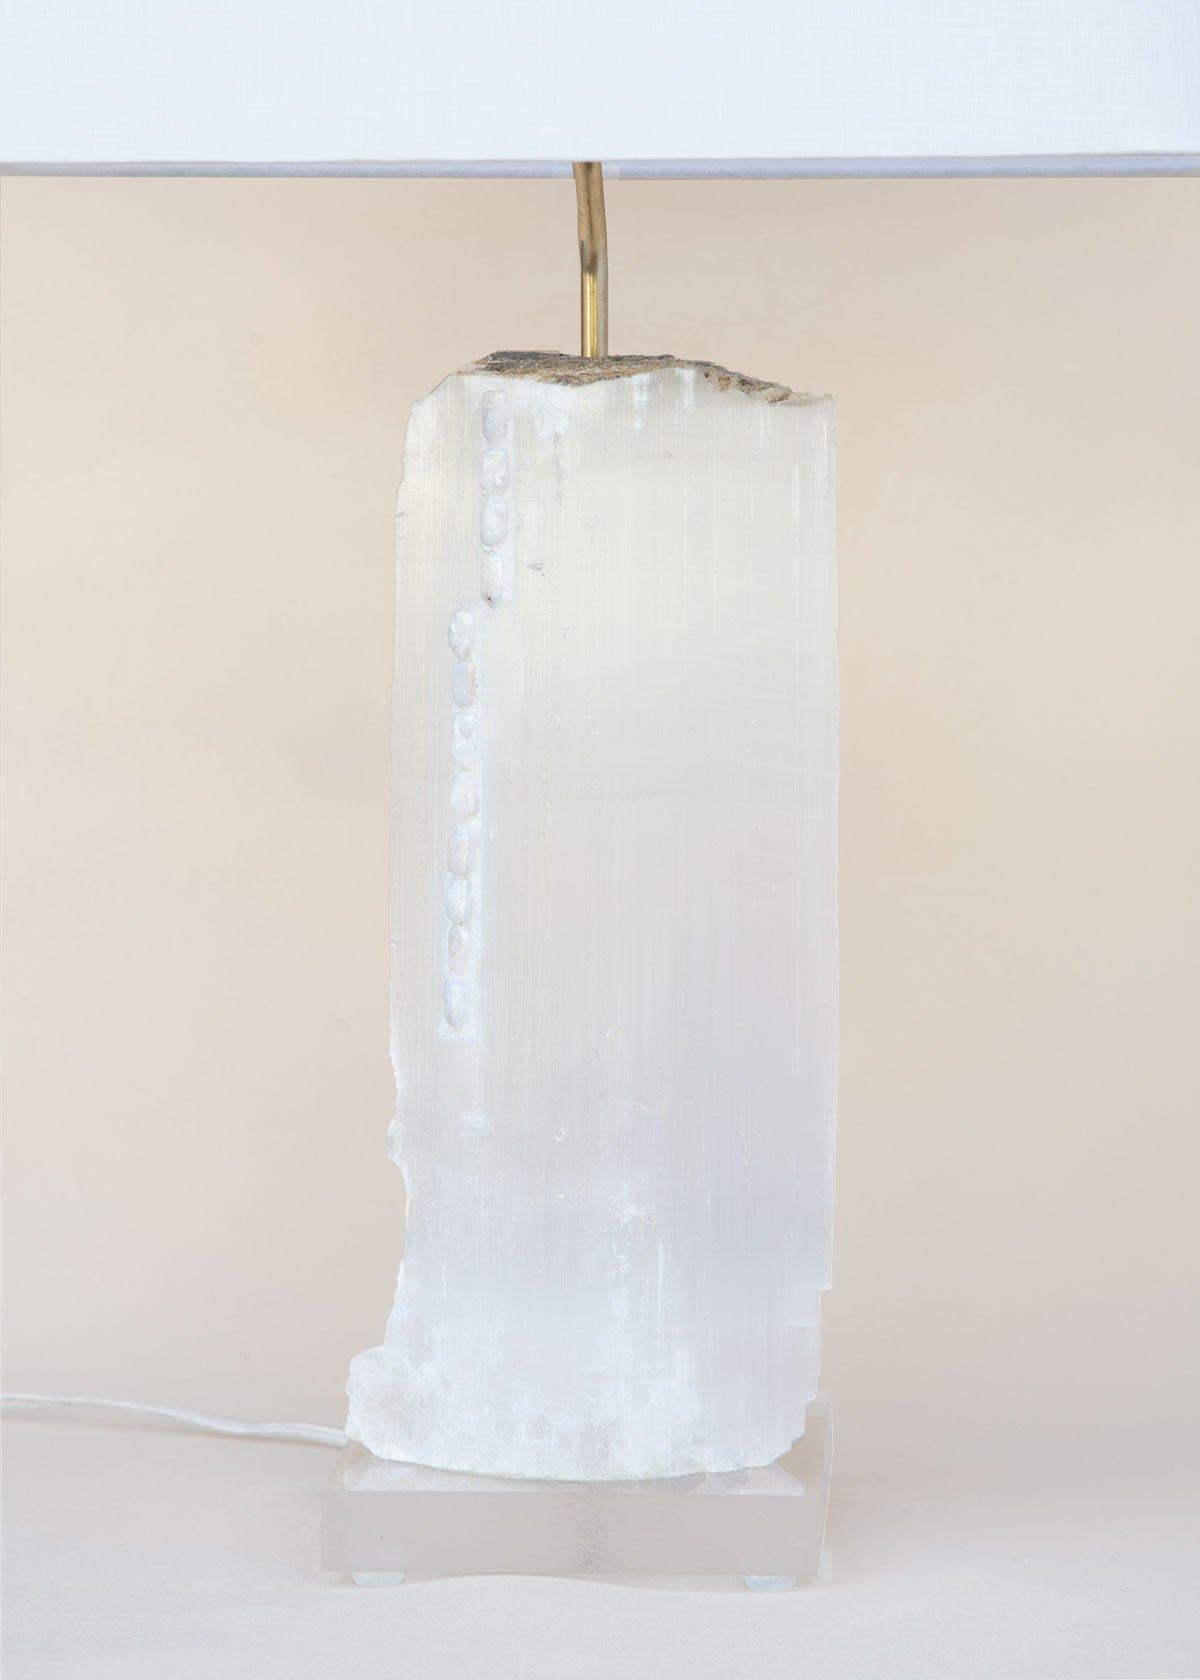 A ruler selenite lamp with baroque pearls on lucite. 

Ruler selenite is made up of single prismatic crystals from Morocco that were formed in extensive beds by the evaporation of ocean brine. This mineral is characterized by a silk, pearly luster